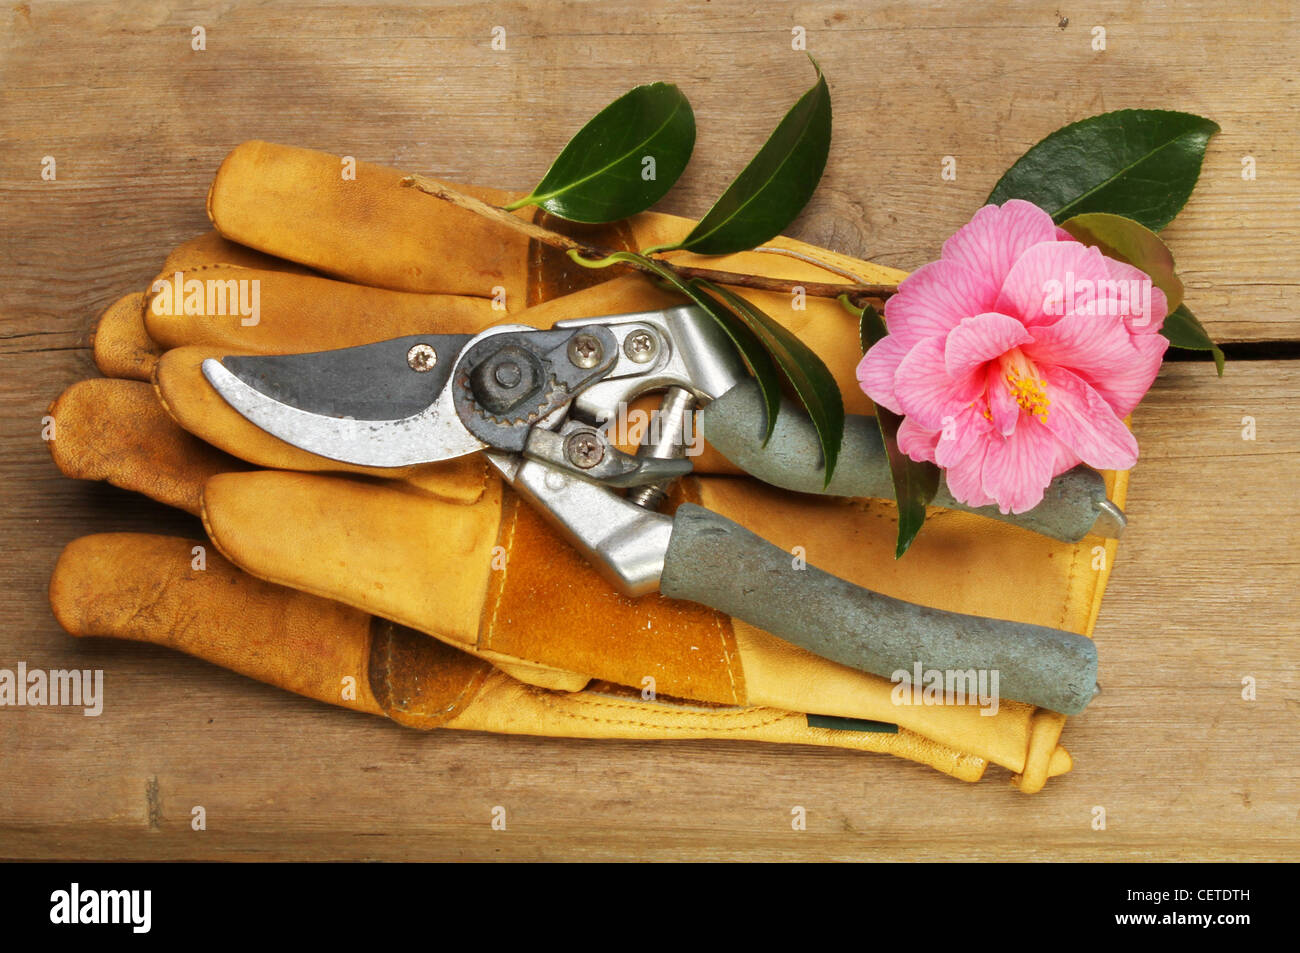 Secateurs, gardening gloves and a cut camellia branch on a wooden board Stock Photo